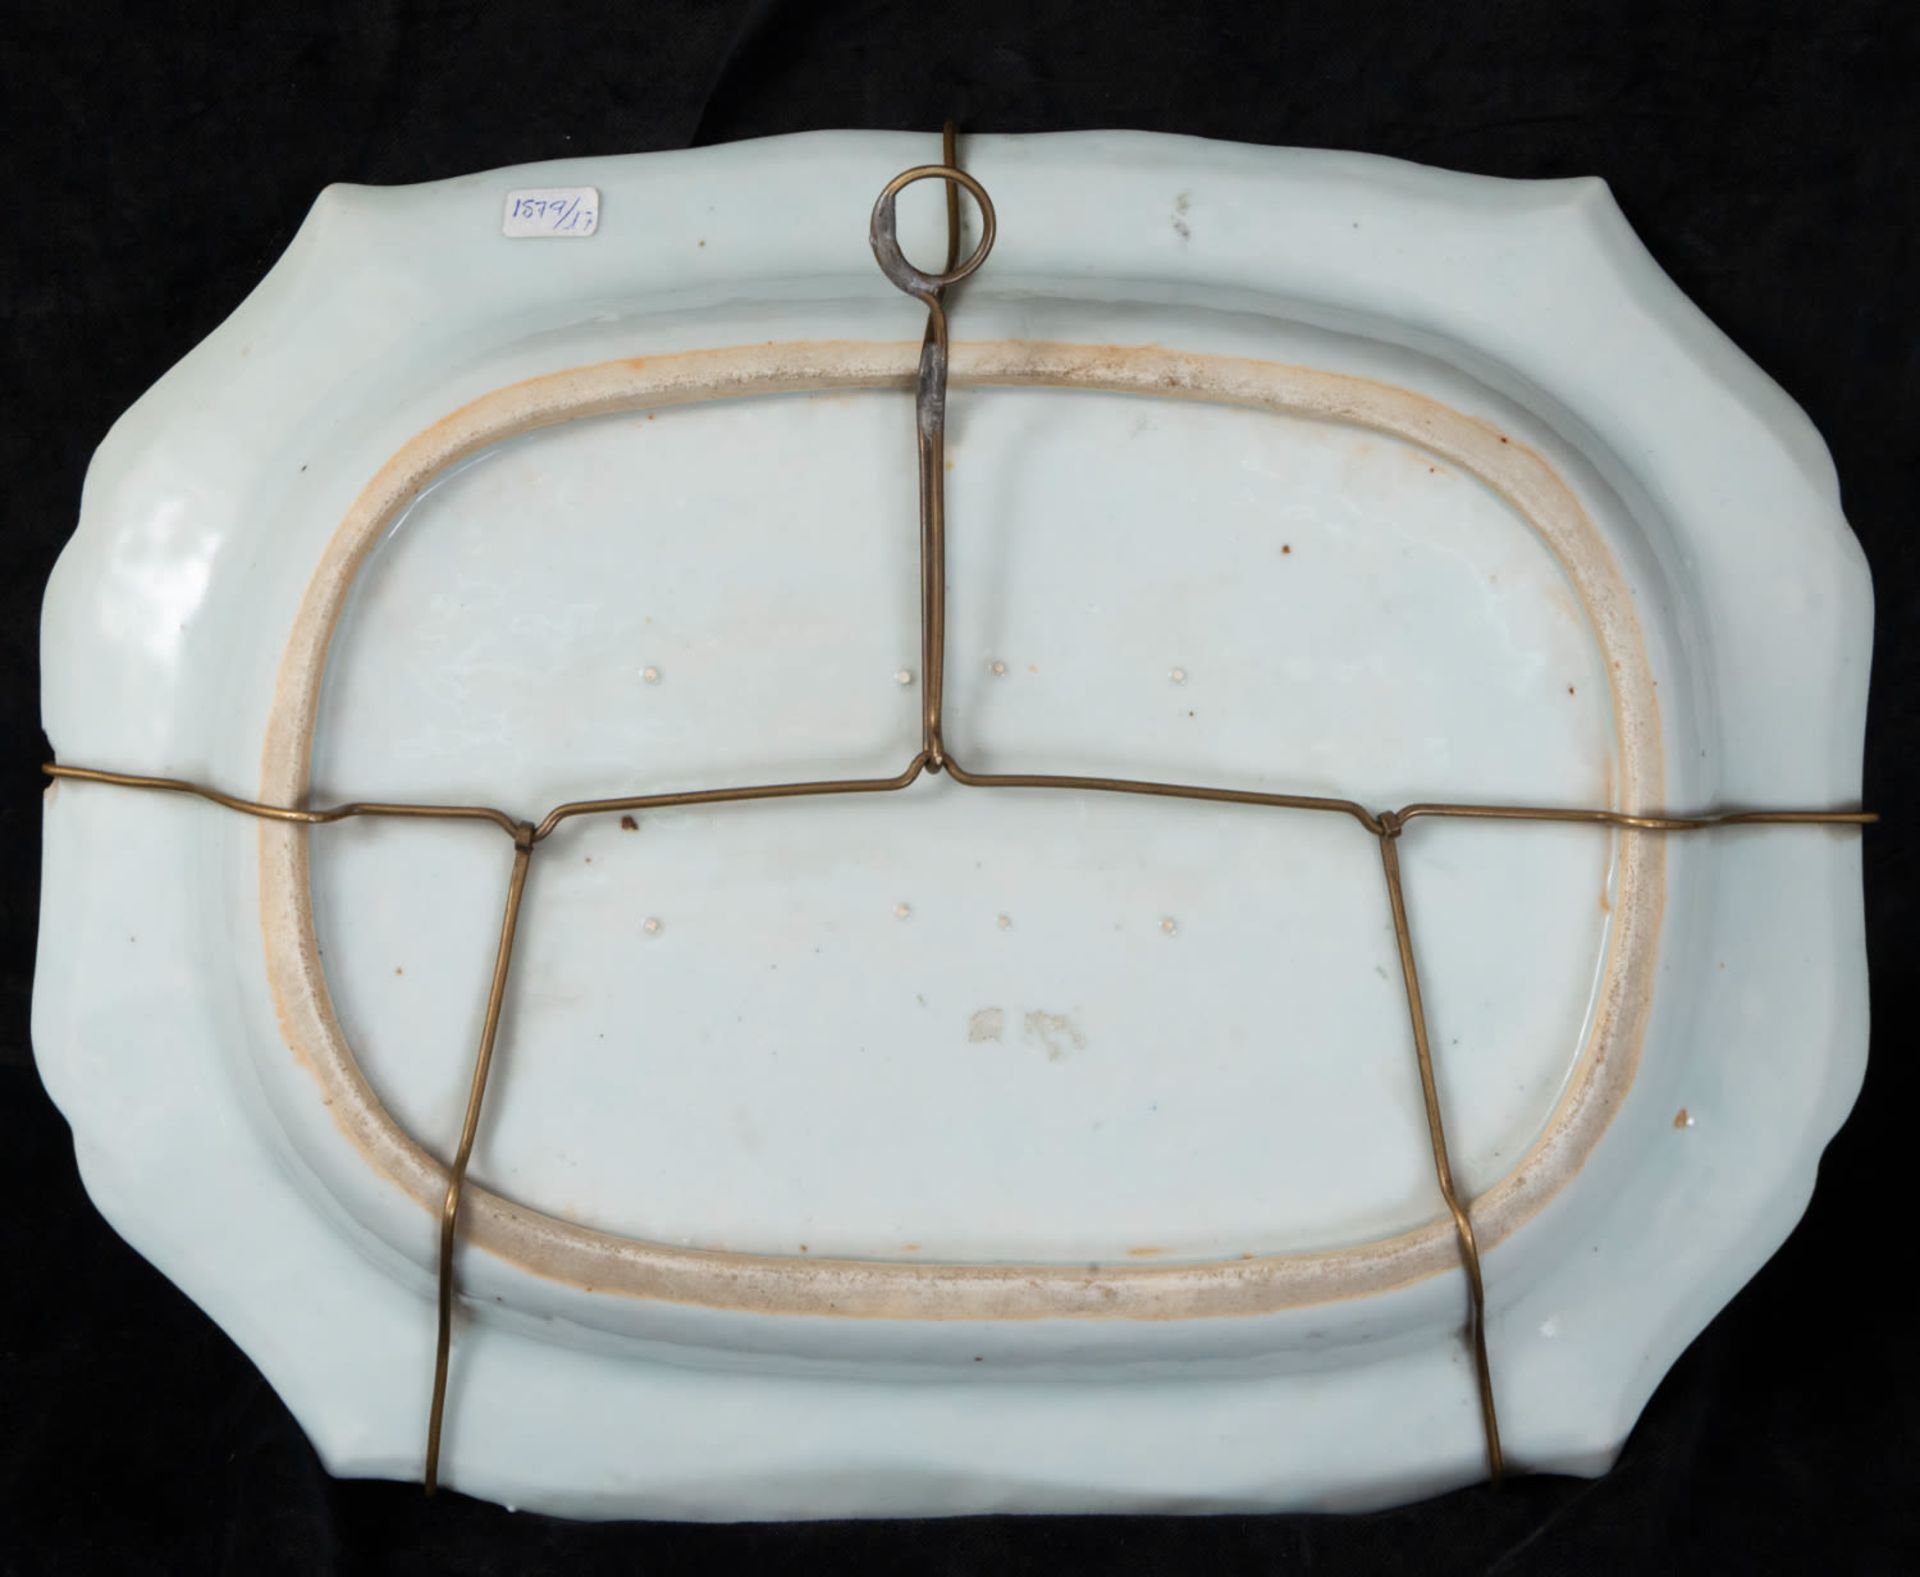 Tray with Chinese characters from the Rosa series, 18th century - Bild 3 aus 3